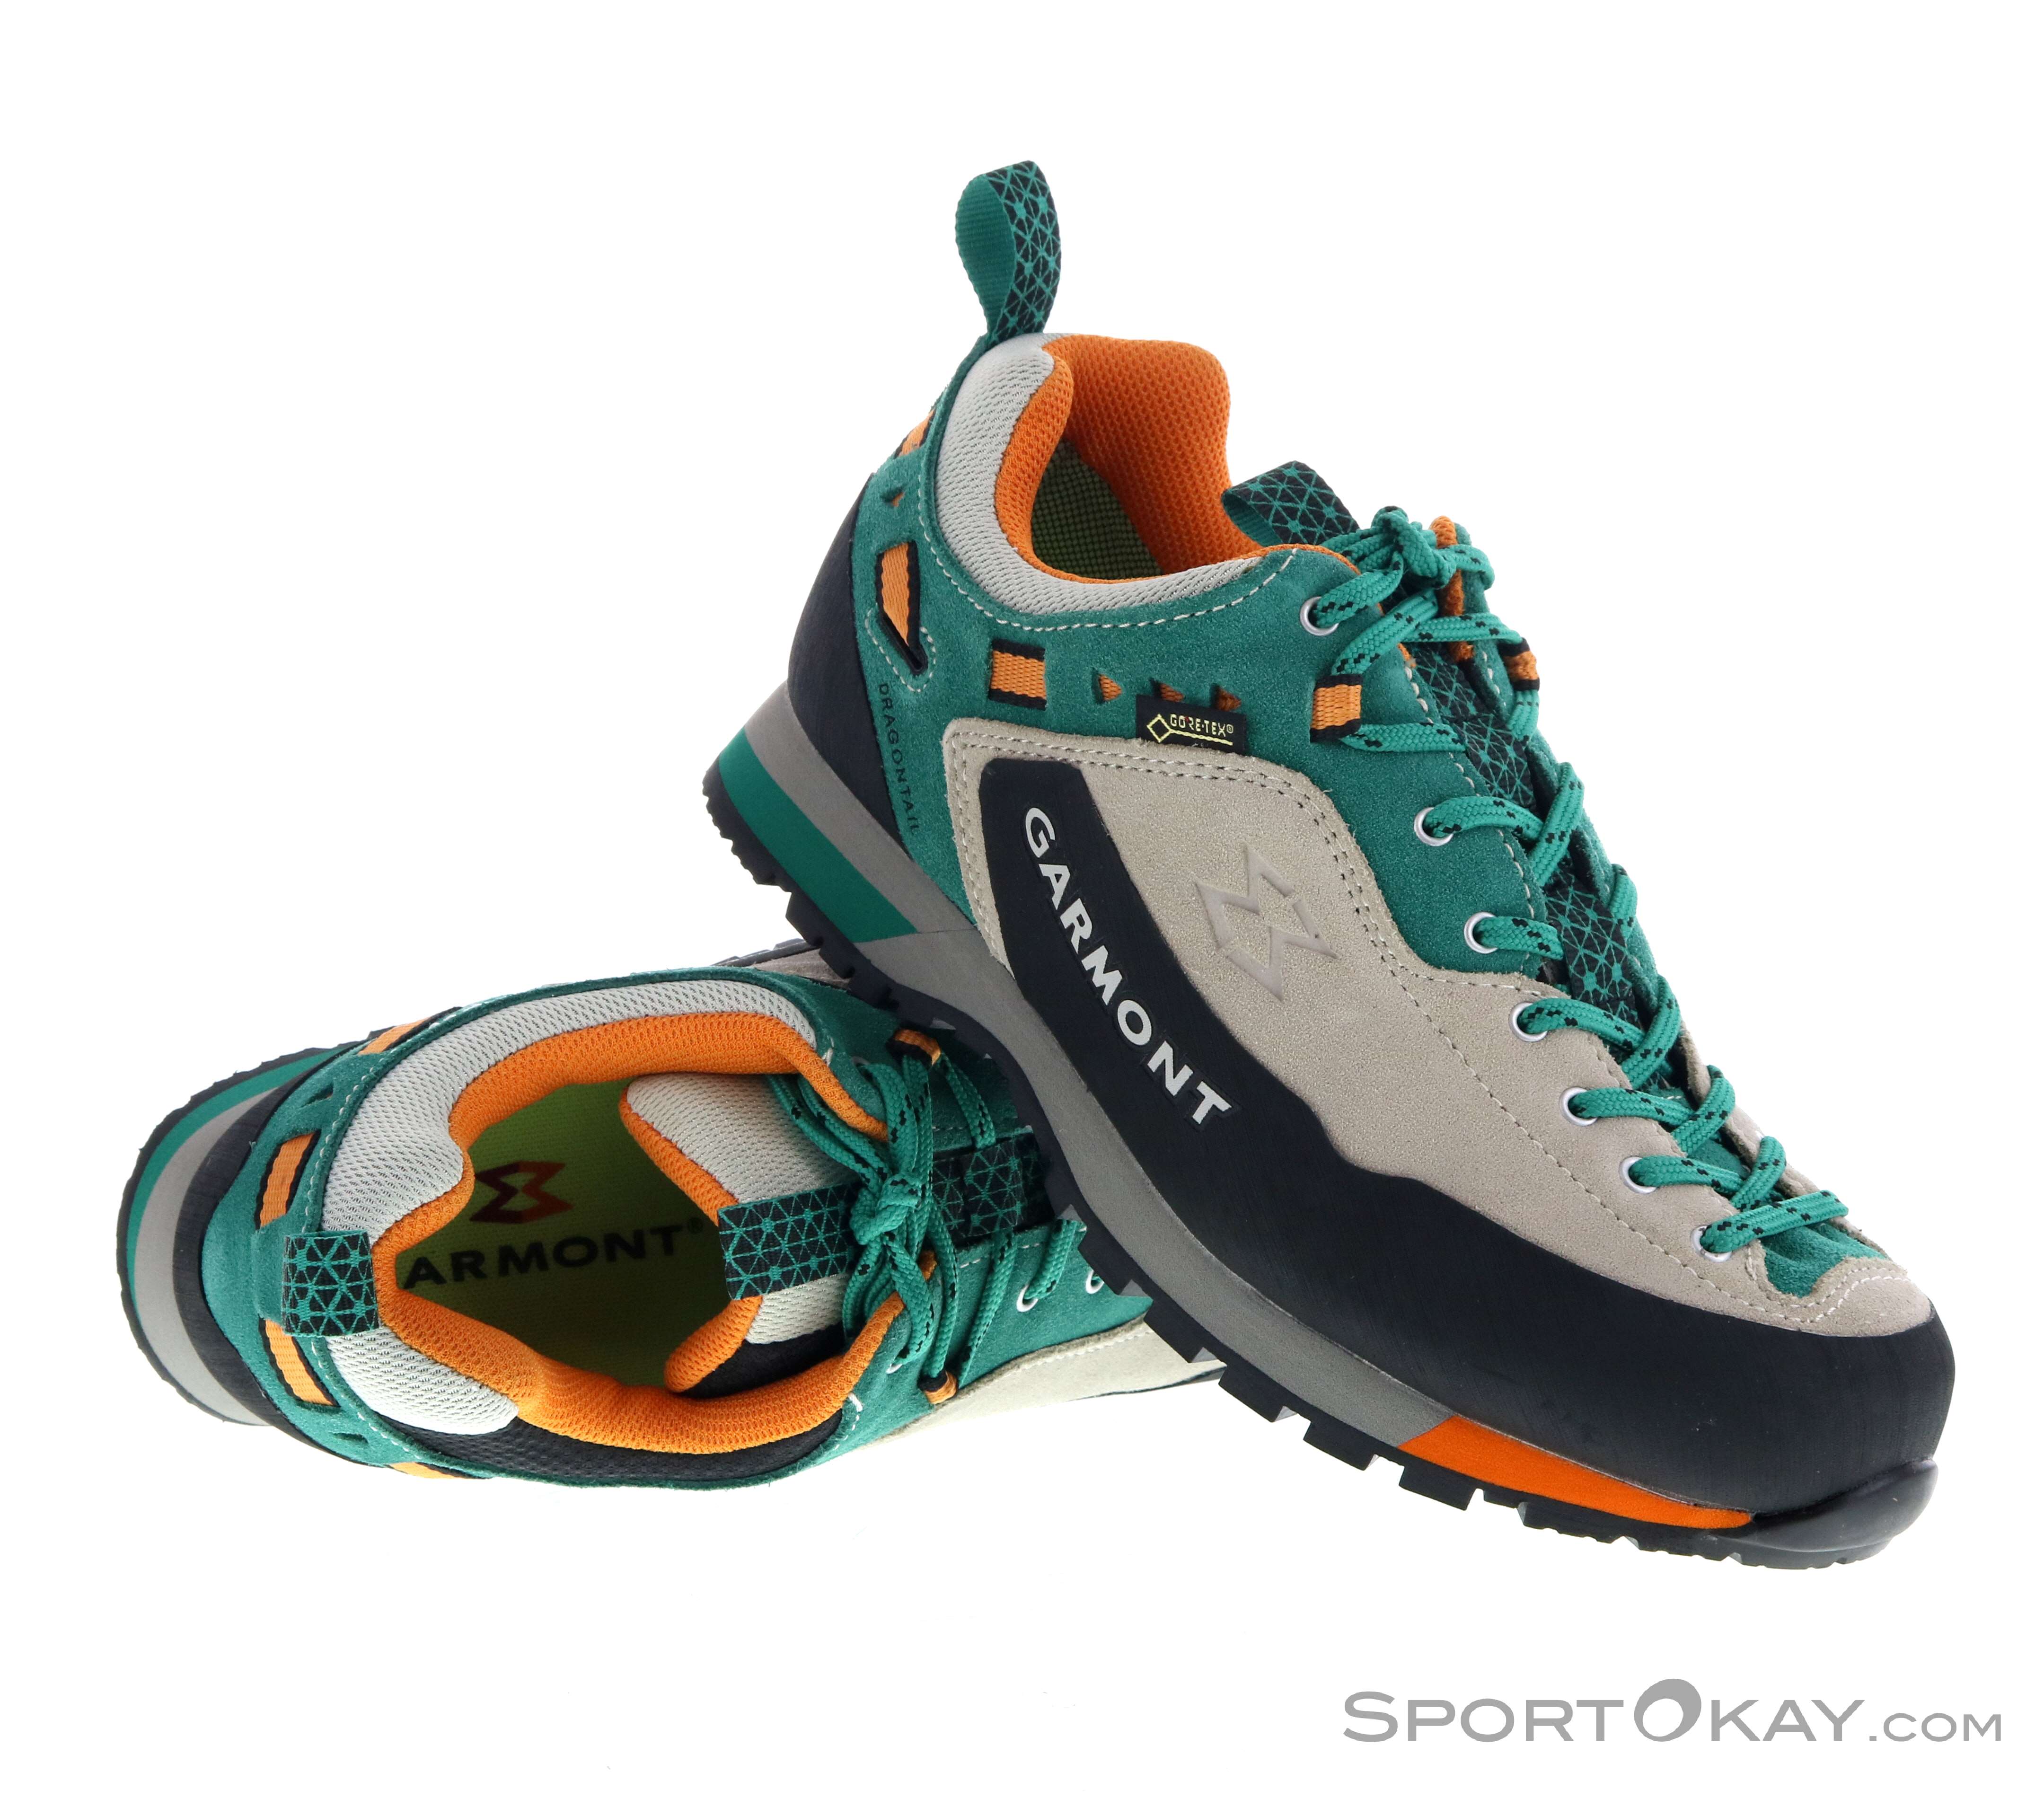 Garmont Womens Dragontail LT Hiking Shoes